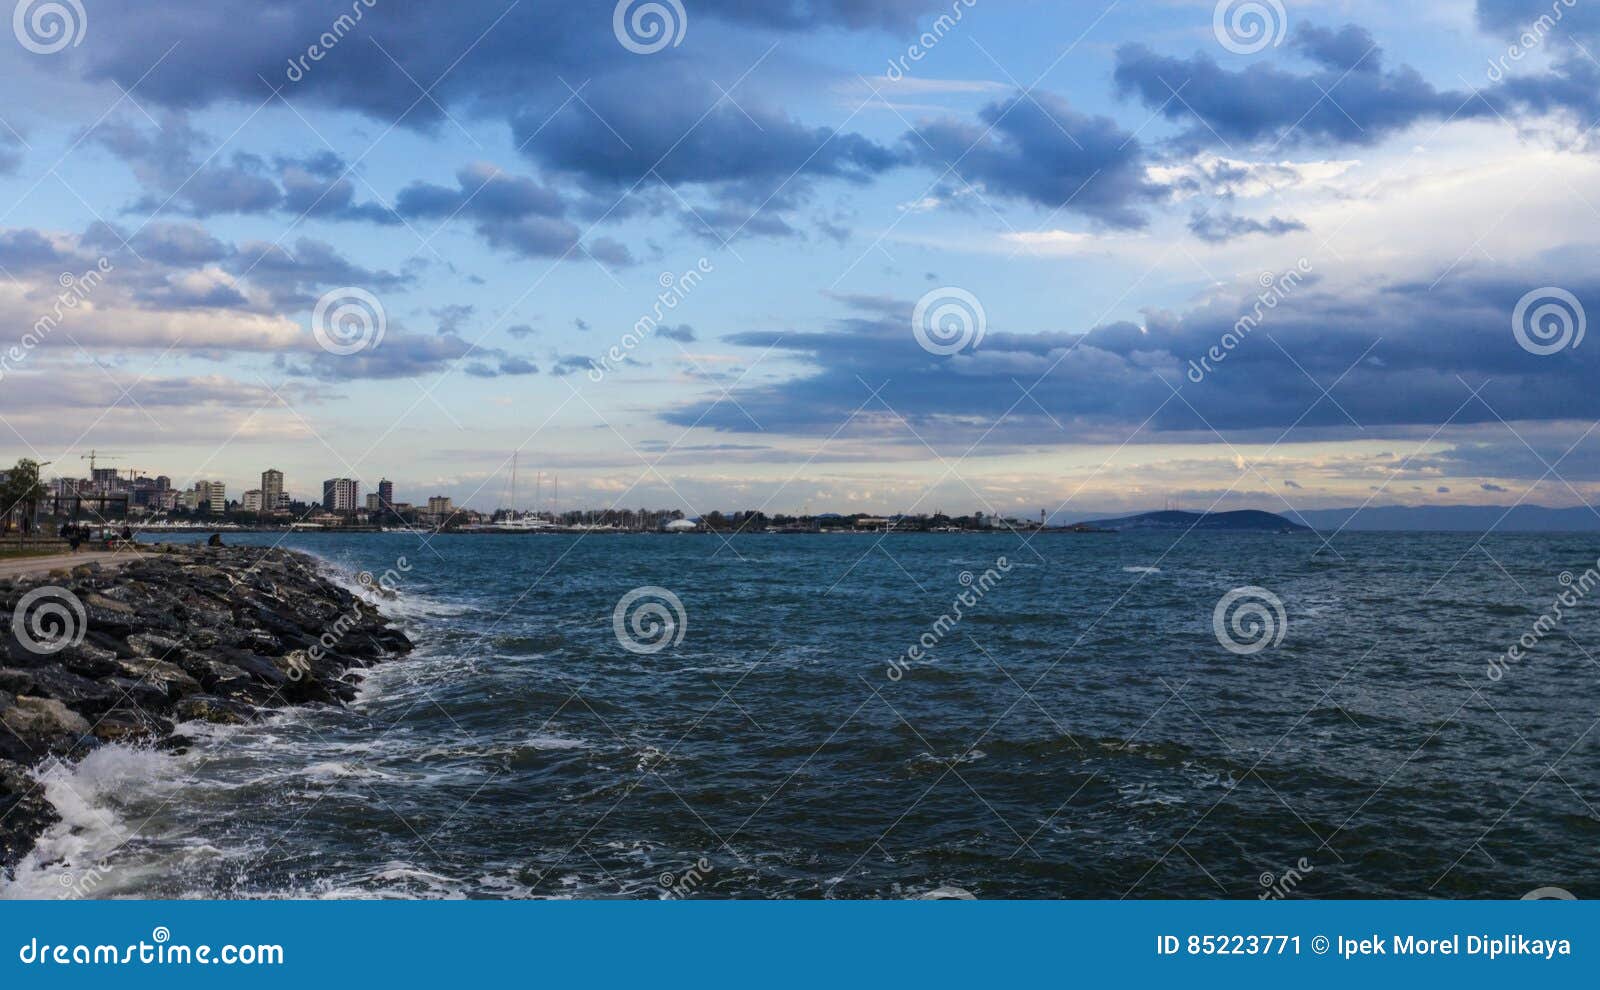 dramatic view of sea and beautiful sky in moda, istanbul city